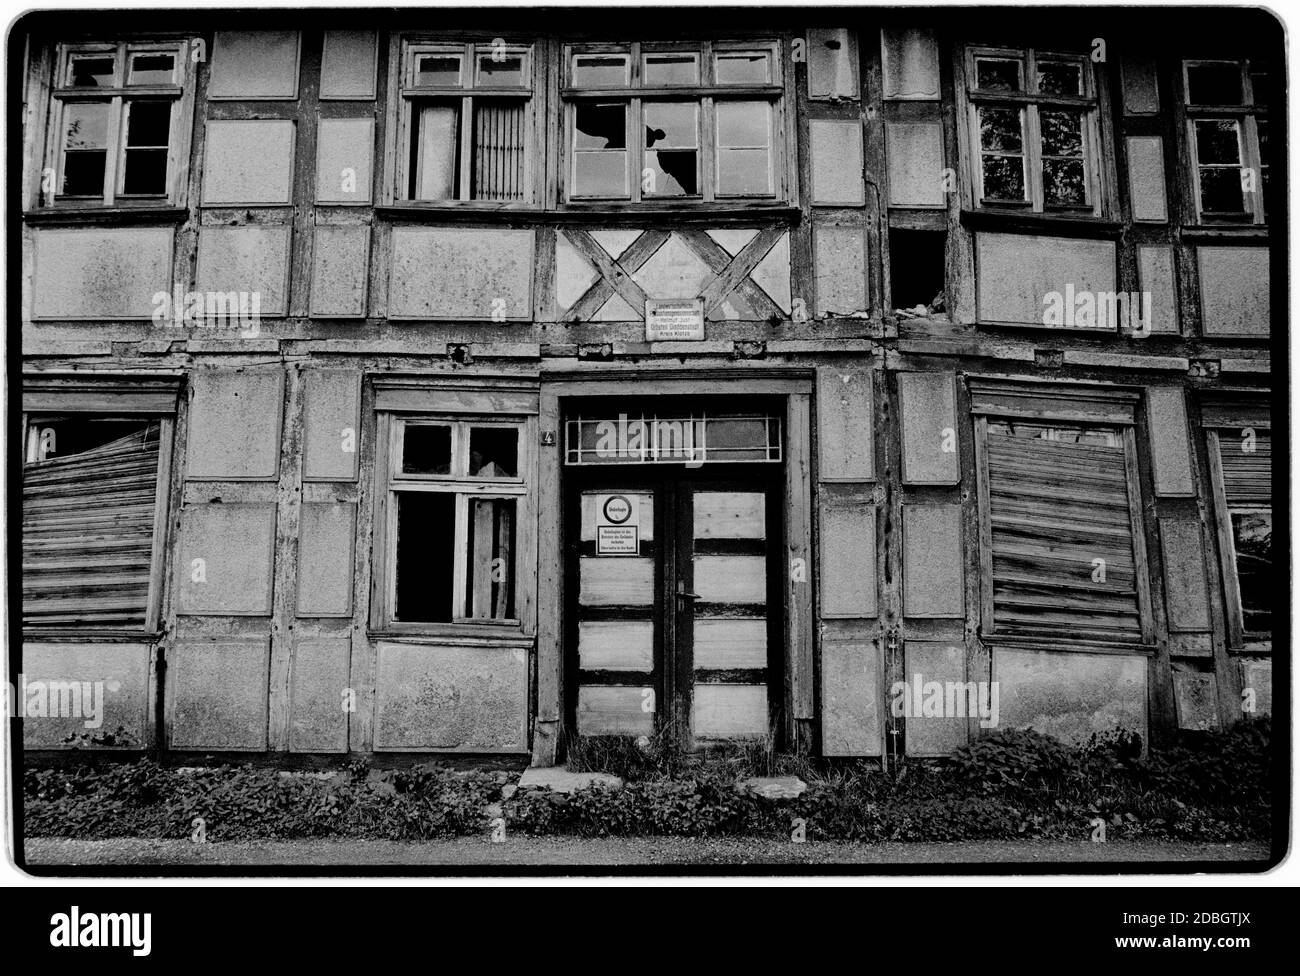 East Germany 1990 scanned in 2020 Street life in border village of Gladdenstedt. East Germany, Deutsche Demokratische Republik the DDR after the fall of the Wall but before reunification March 1990 and scanned in 2020.East Germany, officially the German Democratic Republic, was a country that existed from 1949 to 1990, the period when the eastern portion of Germany was part of the Eastern Bloc during the Cold War. Stock Photo